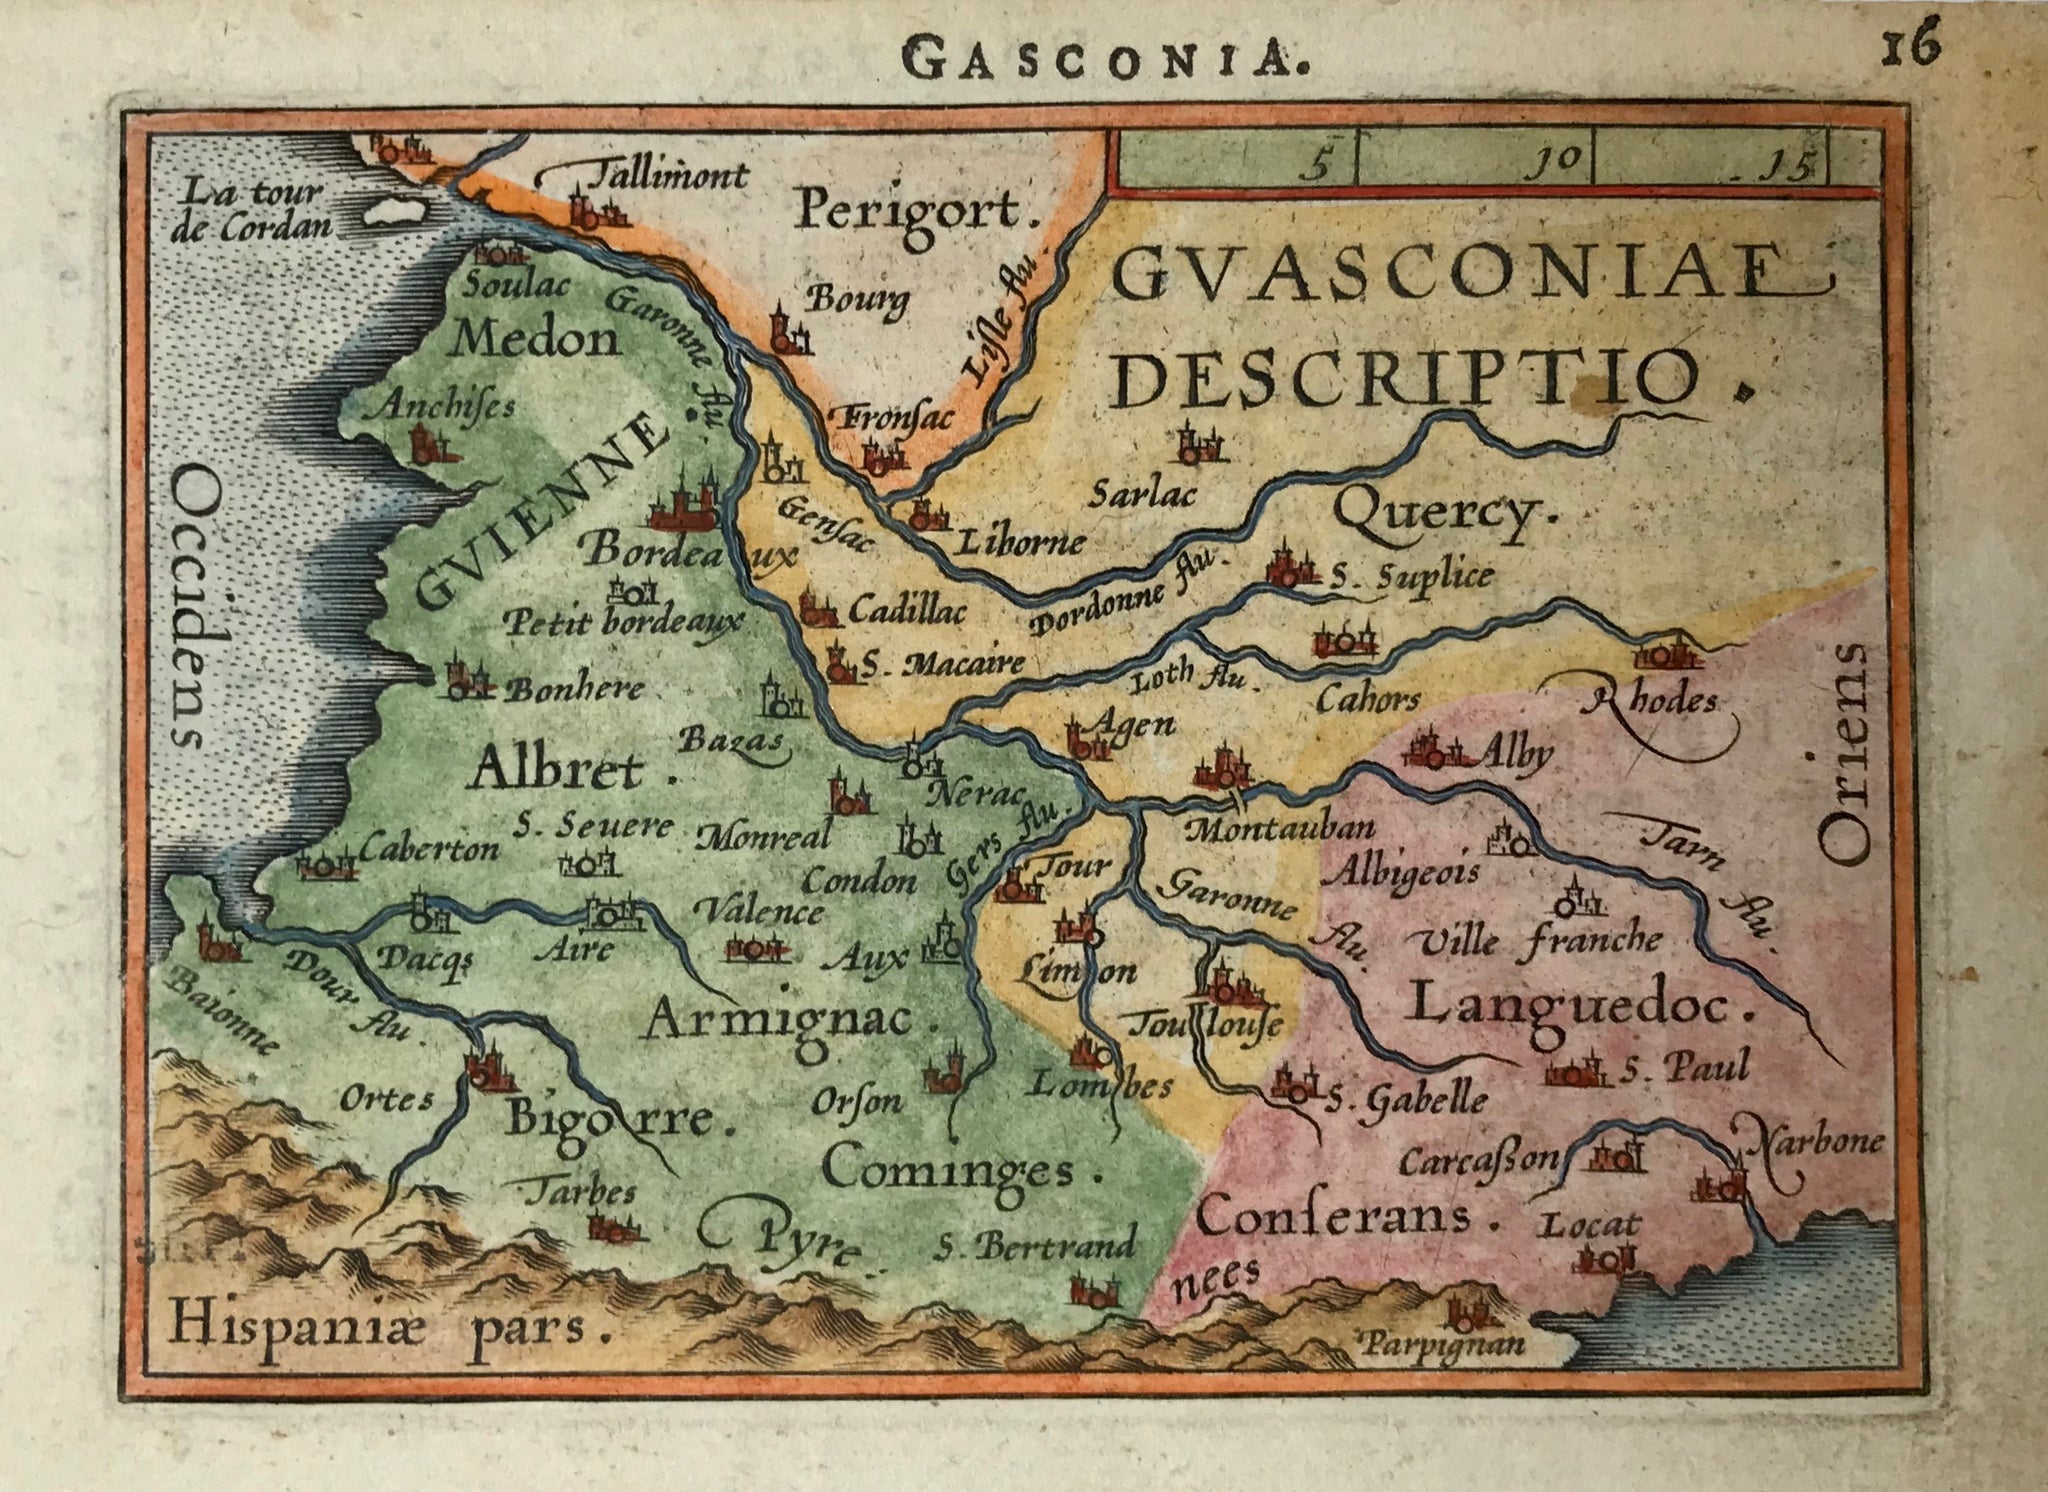 France, "Gasconia". Copper etching in modern coloring from the pocket atlas by A. Ortelius. Antwerp, ca 1580.  Map shows the region of southwestern France with Tour and Agen in the center. In the lower right is a bit of the Mediterranean. In the upper right is a bit of the region of Quercy. In the upper left is a bit of the Perigord region. On the backside is text about Poictou.